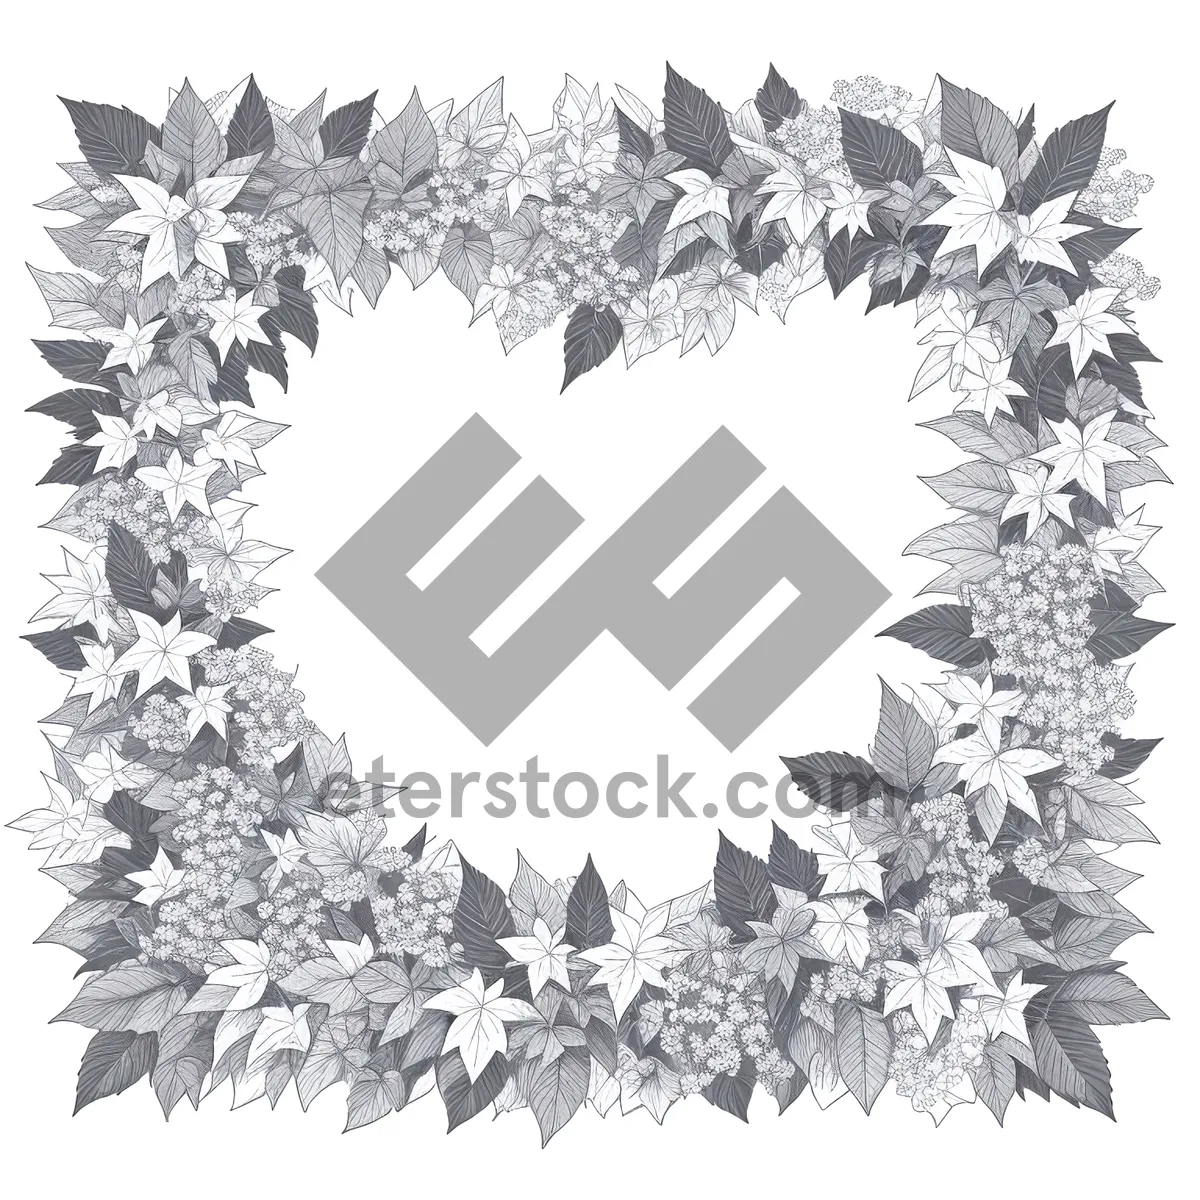 Picture of Frosty Winter Celebration Decor with Snowflake Patterns